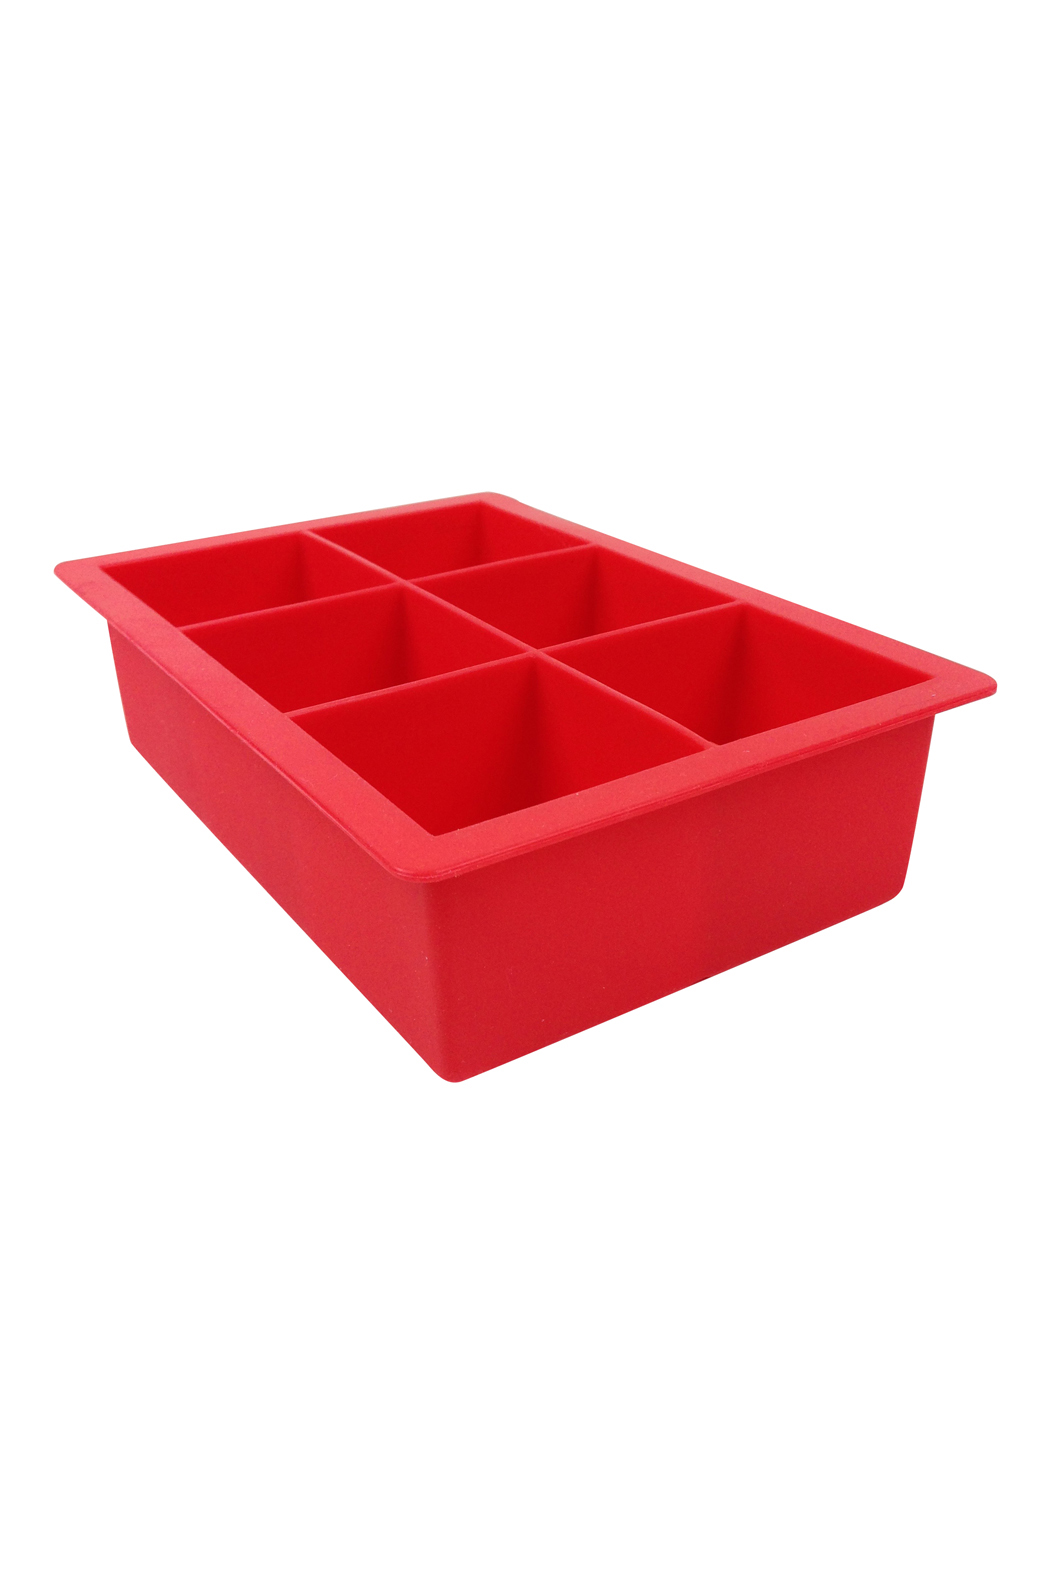 https://www.noyougohome.com/wp-content/uploads/2016/12/gh36.-Red-Tray-.jpg